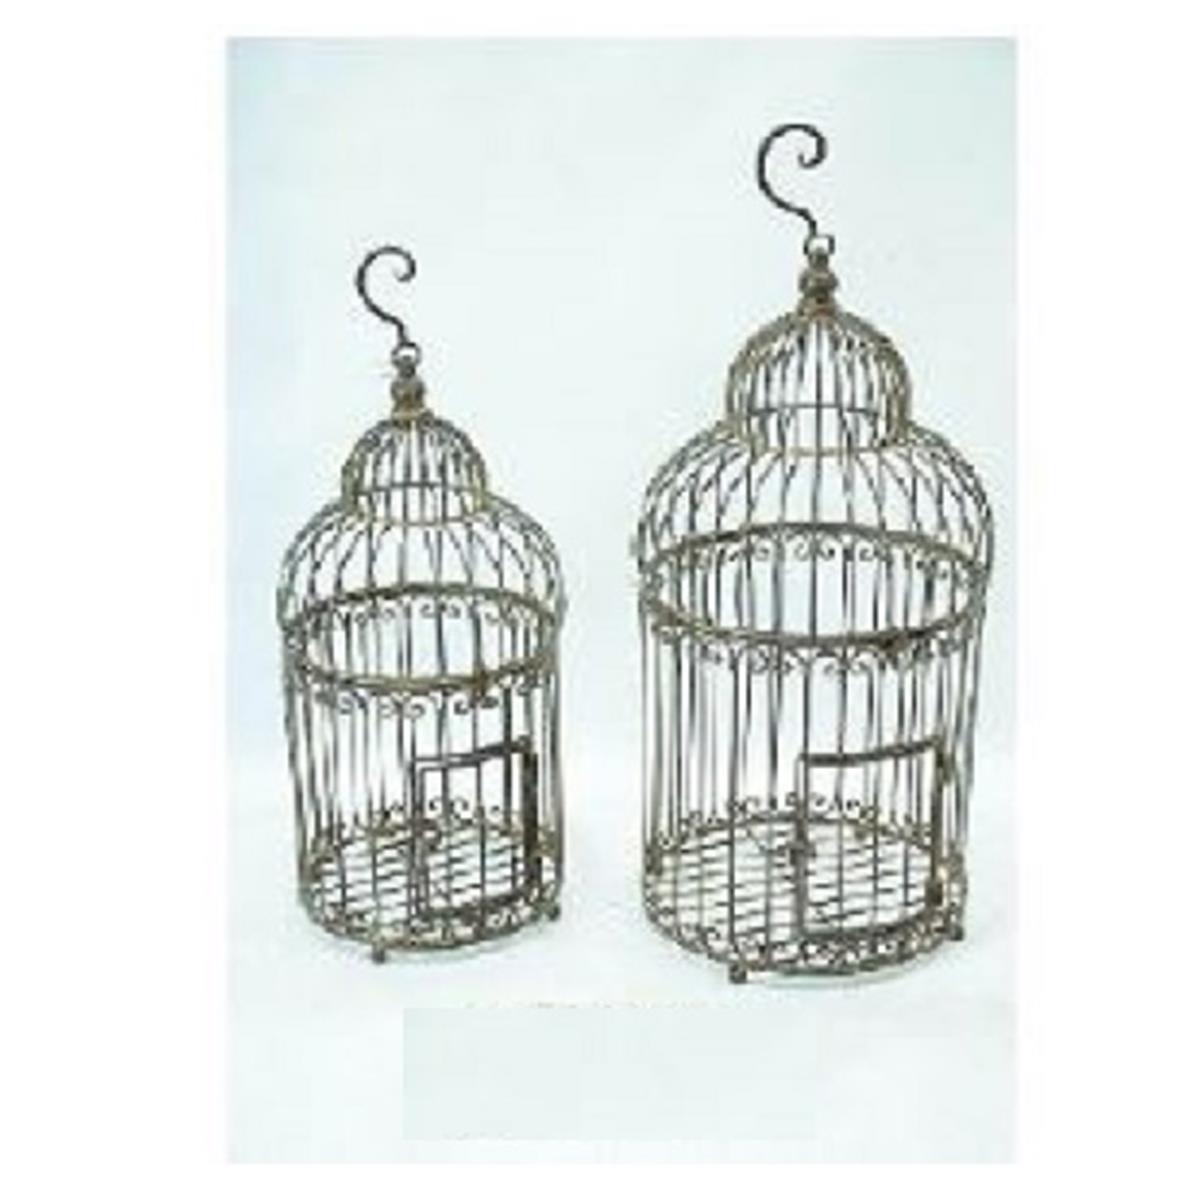 A PAIR OF WHITE IRON BIRDCAGES